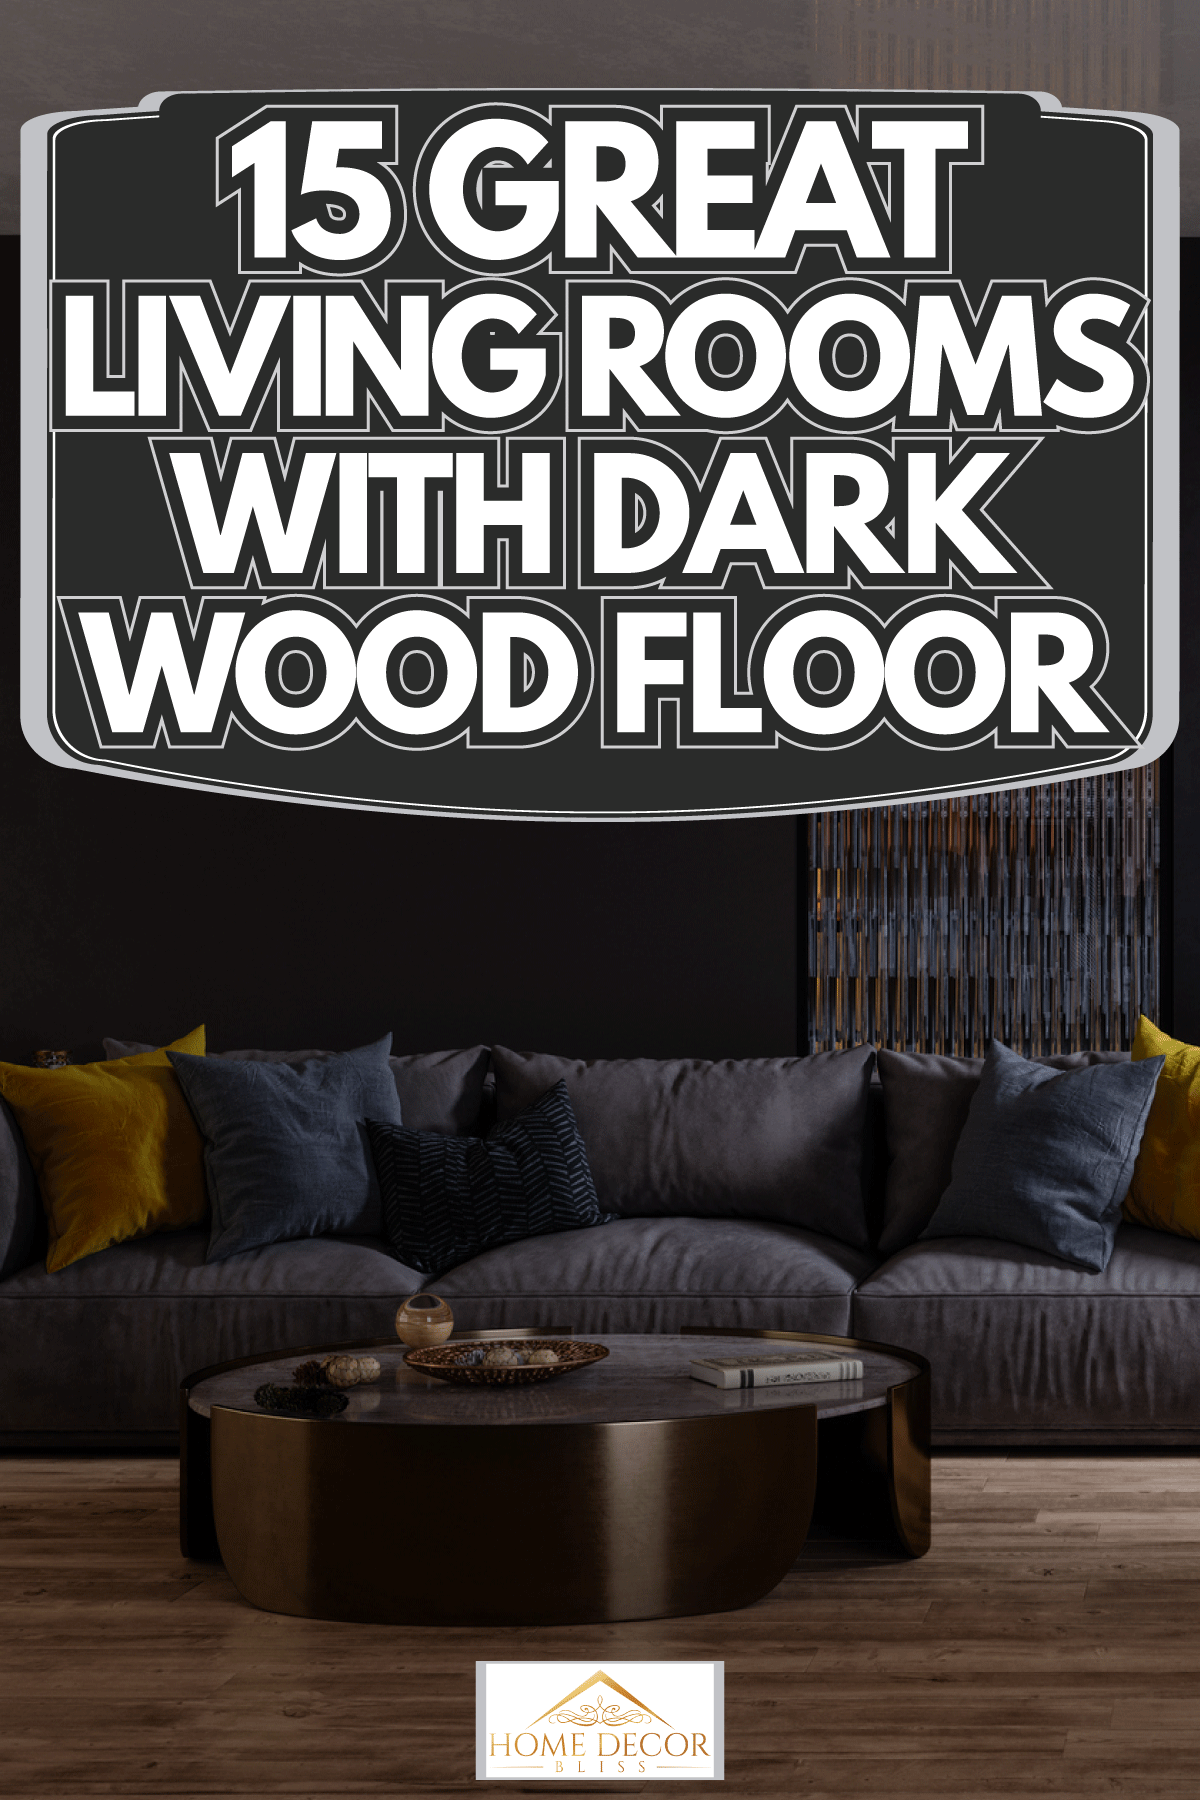 20 Great Living Rooms With Dark Wood Floor   Home Decor Bliss